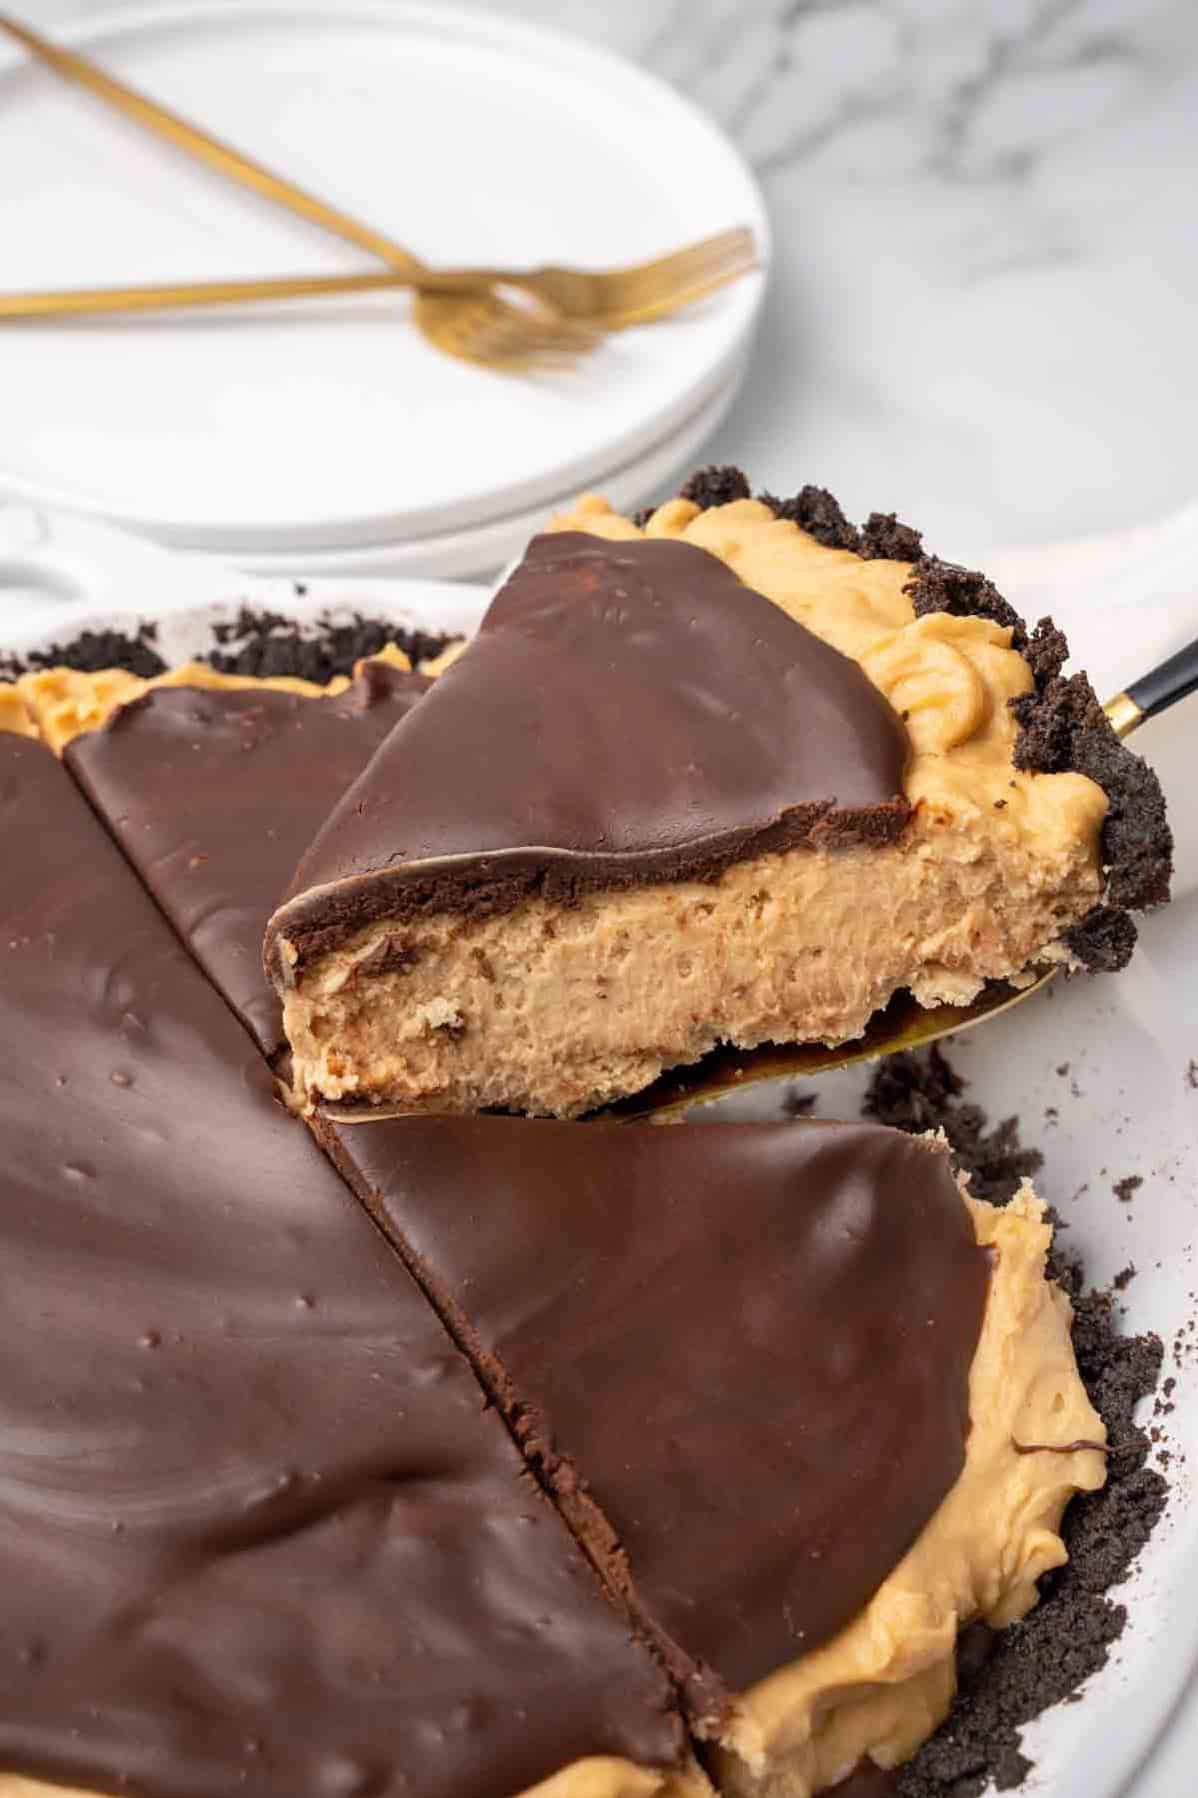  Chocolate, peanut butter, and cream - the star ingredients of this delicious pie!